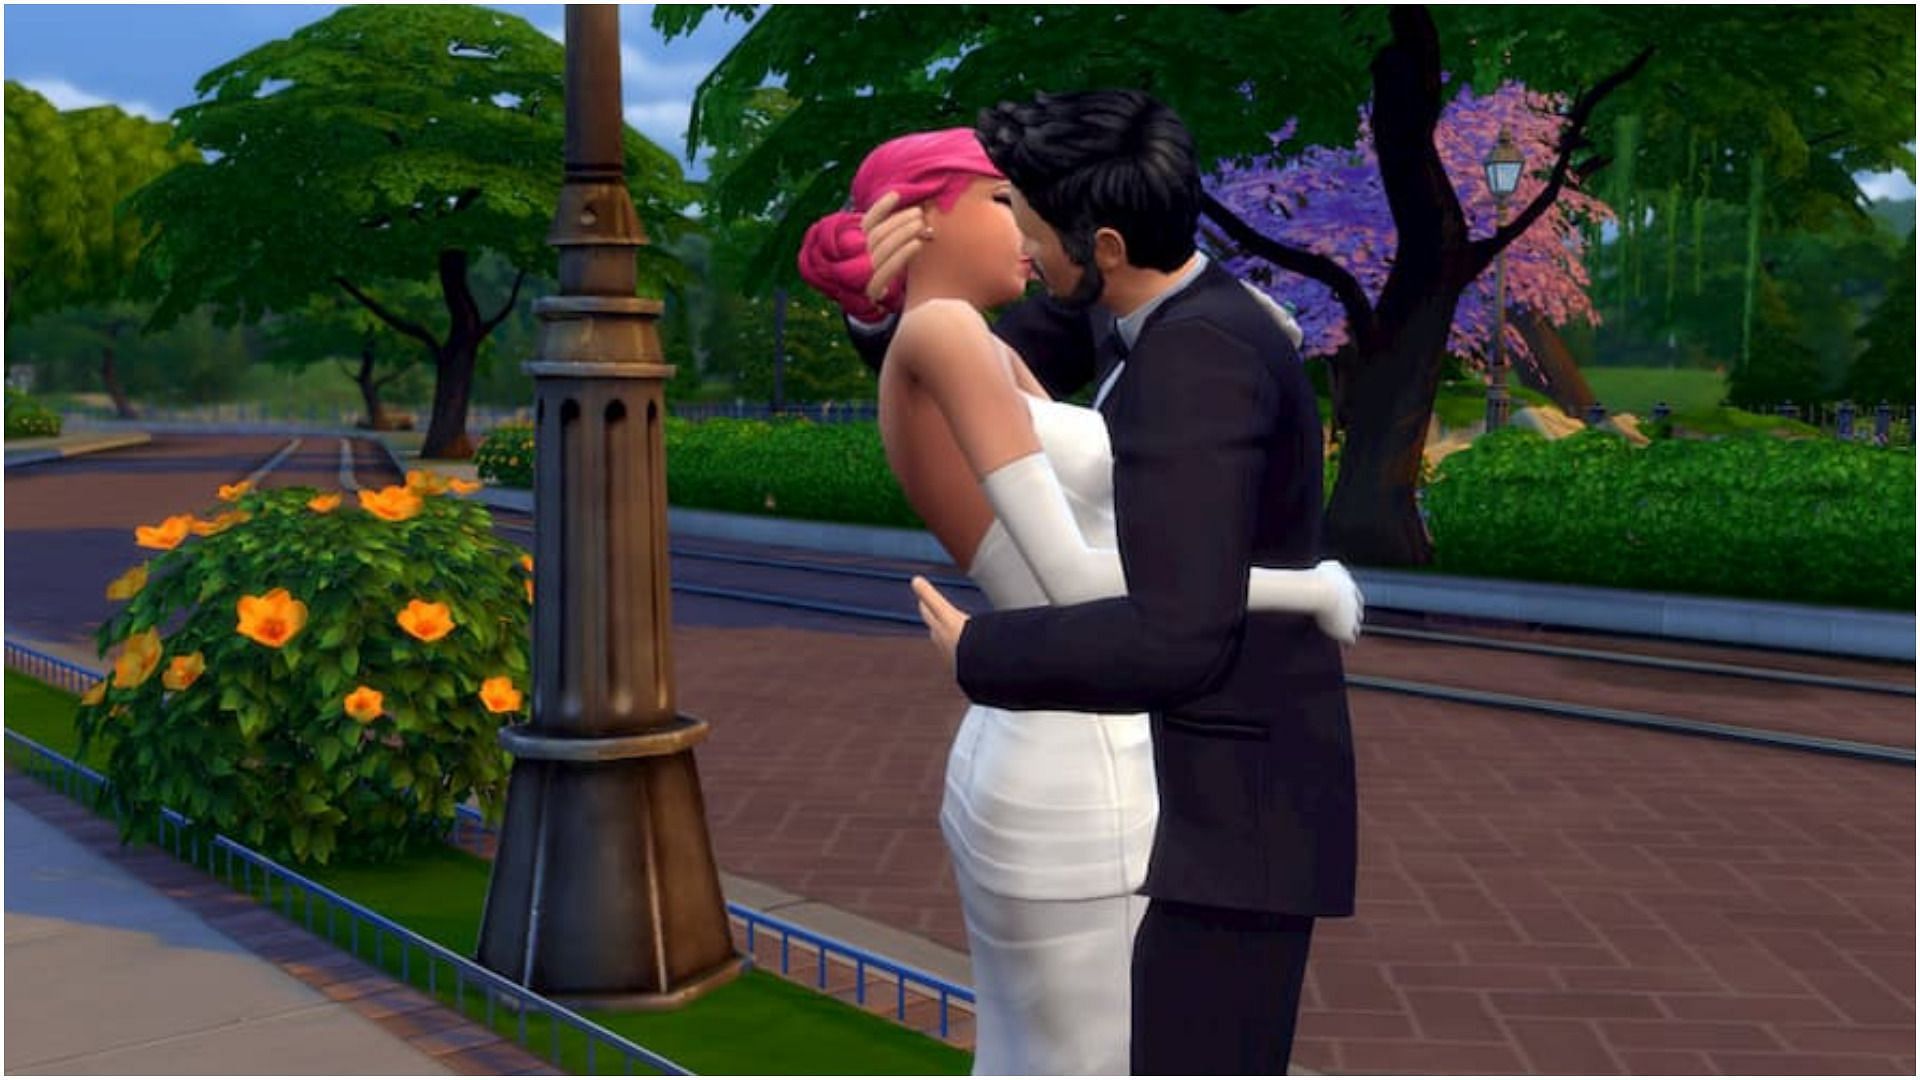 Find your true love with a Tinder-esque app (Image via Sims 4)